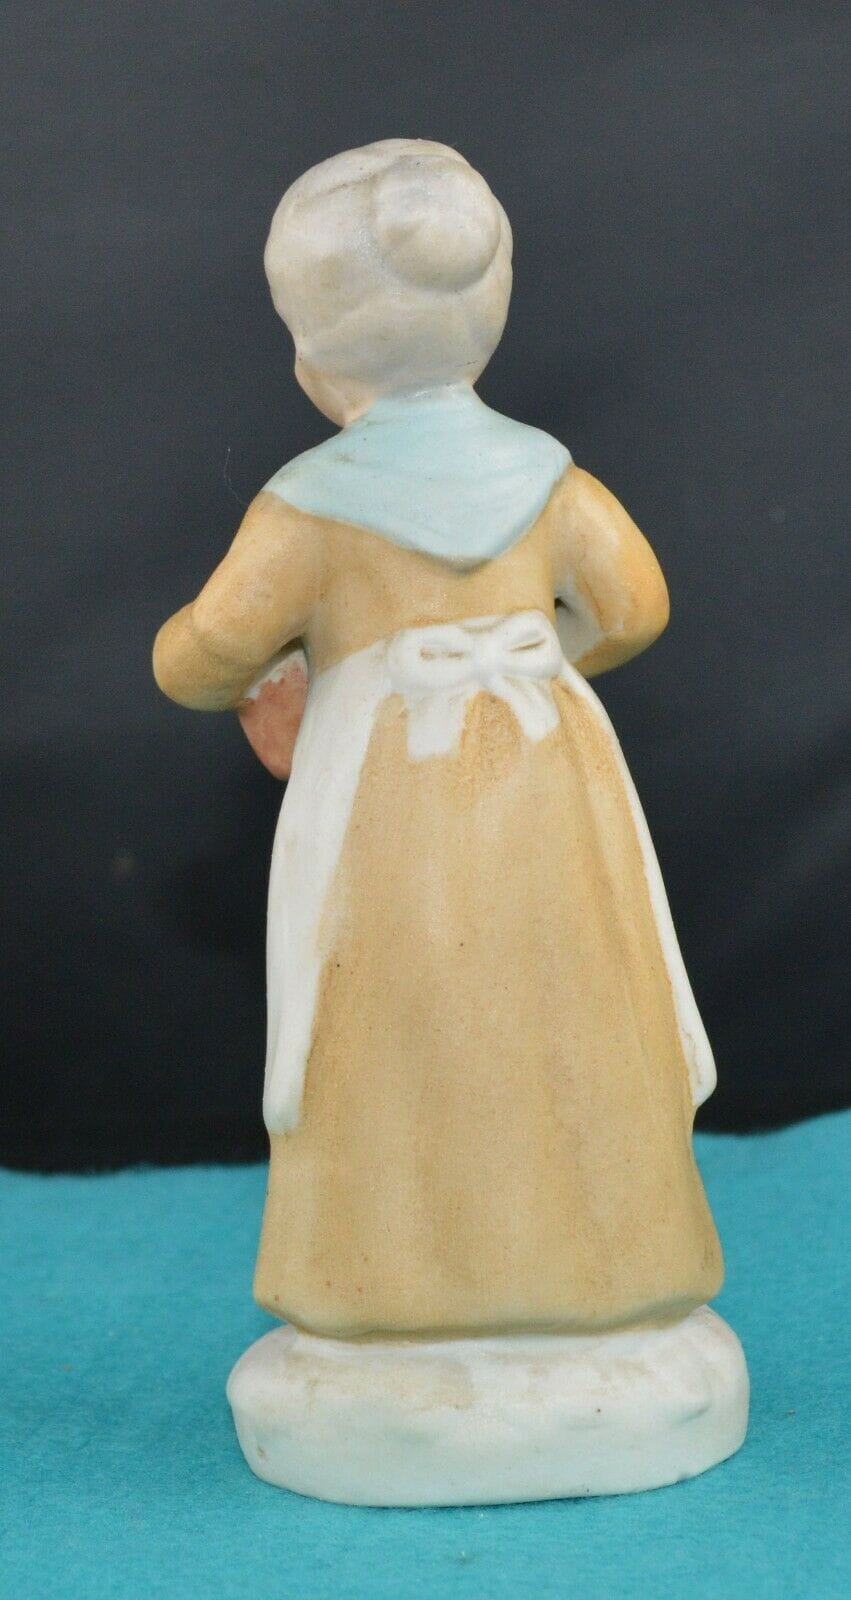 DECORATIVE FIGURINE A MALE FIGURINE SITTING CROSSED LEG & LADY FIGURINE w/JUG(PREVIOUSLY OWNED) GOOD CONDITION - TMD167207